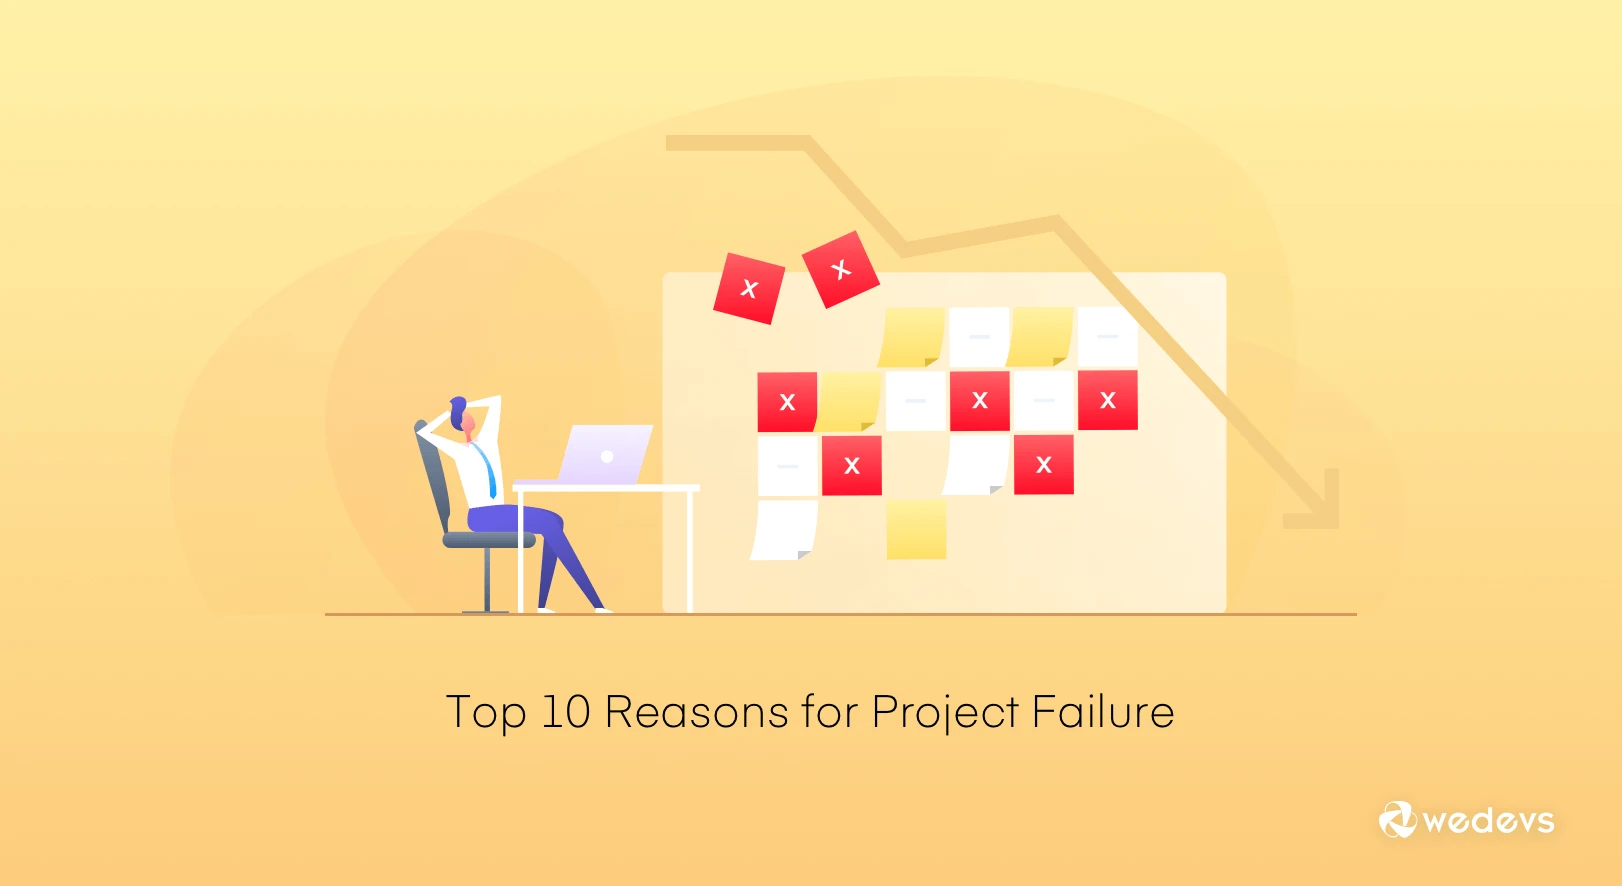 Top 10 Reasons for Project Failure and How to Avoid them Easily